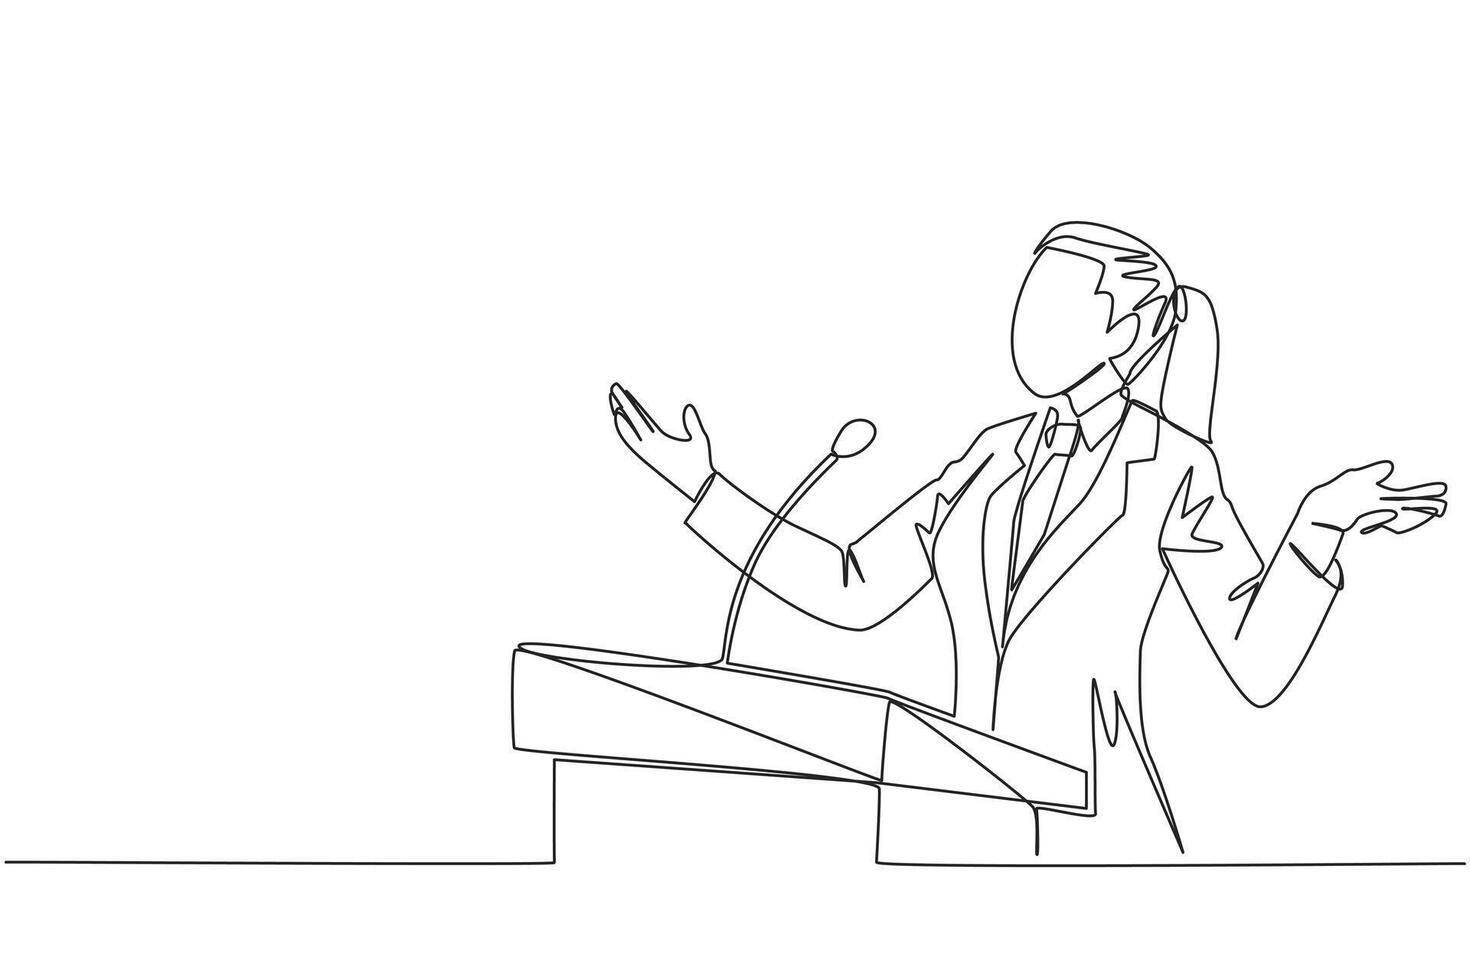 Continuous one line drawing young businesswoman speaking at podium while opening hands. Explain history of the company to become a multinational company. Single line draw design vector illustration